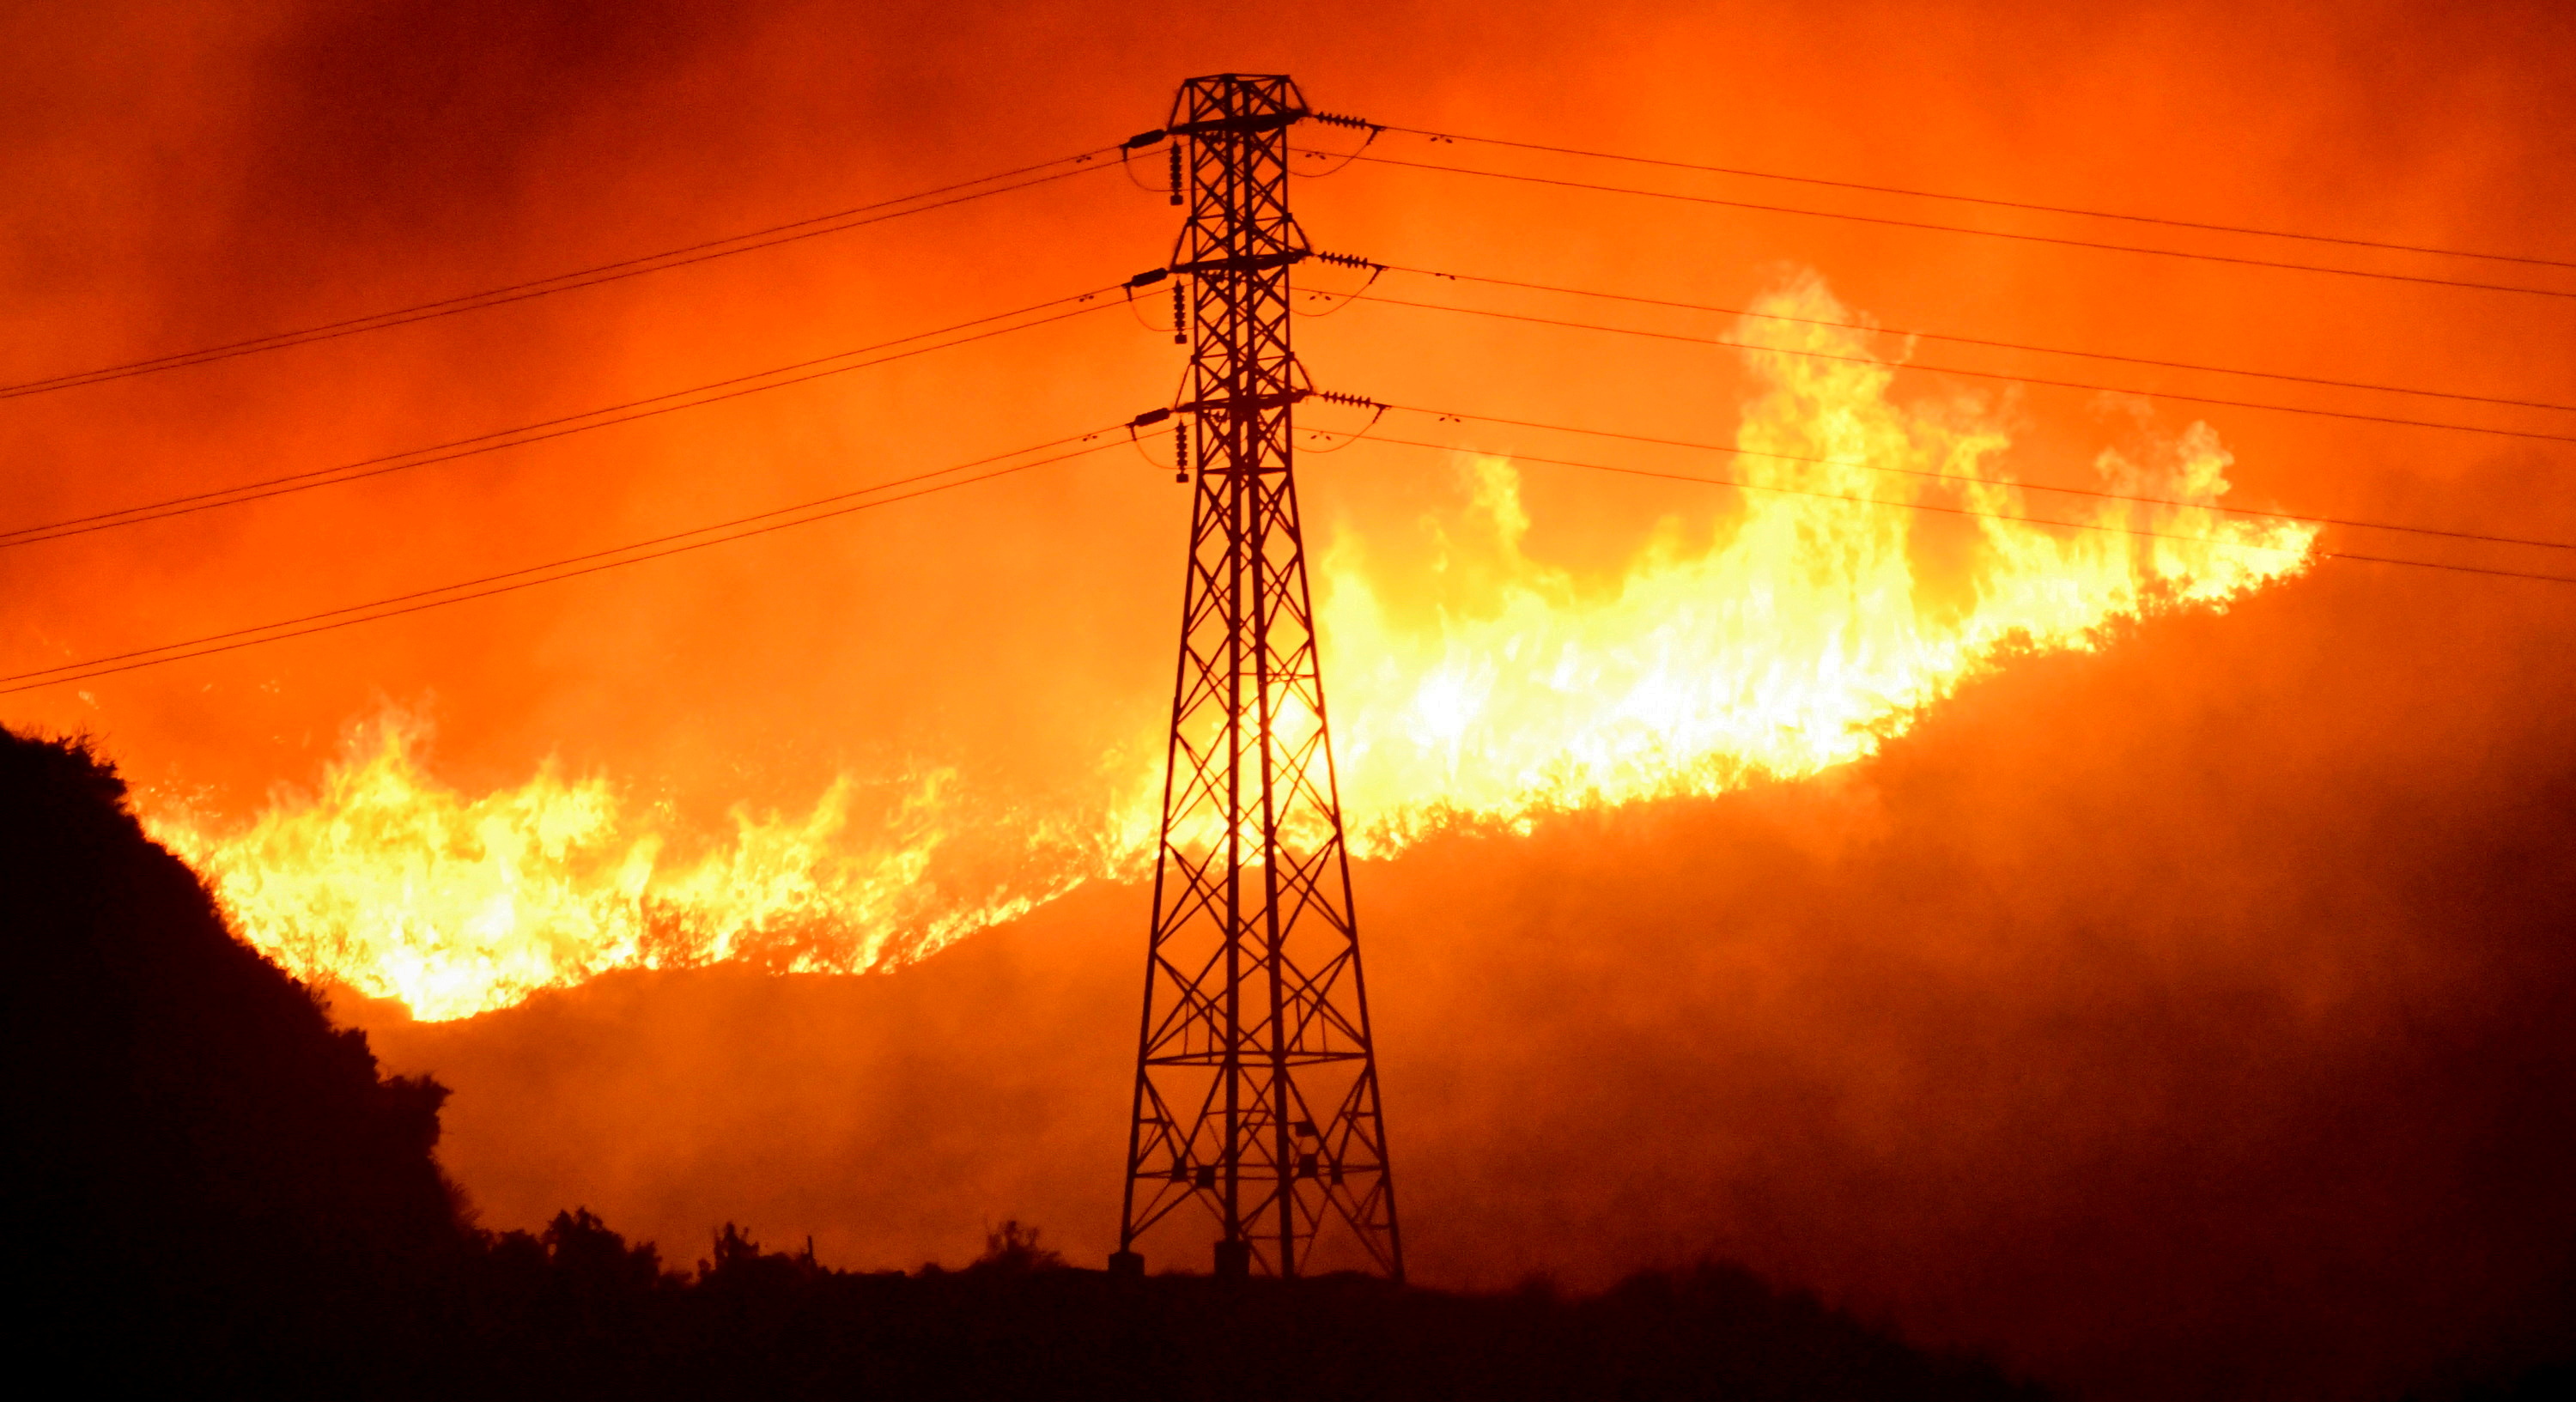 A wind-driven wildfire burns near power line tower in Sylmar, California, U.S., October 10, 2019. REUTERS/Gene Blevins